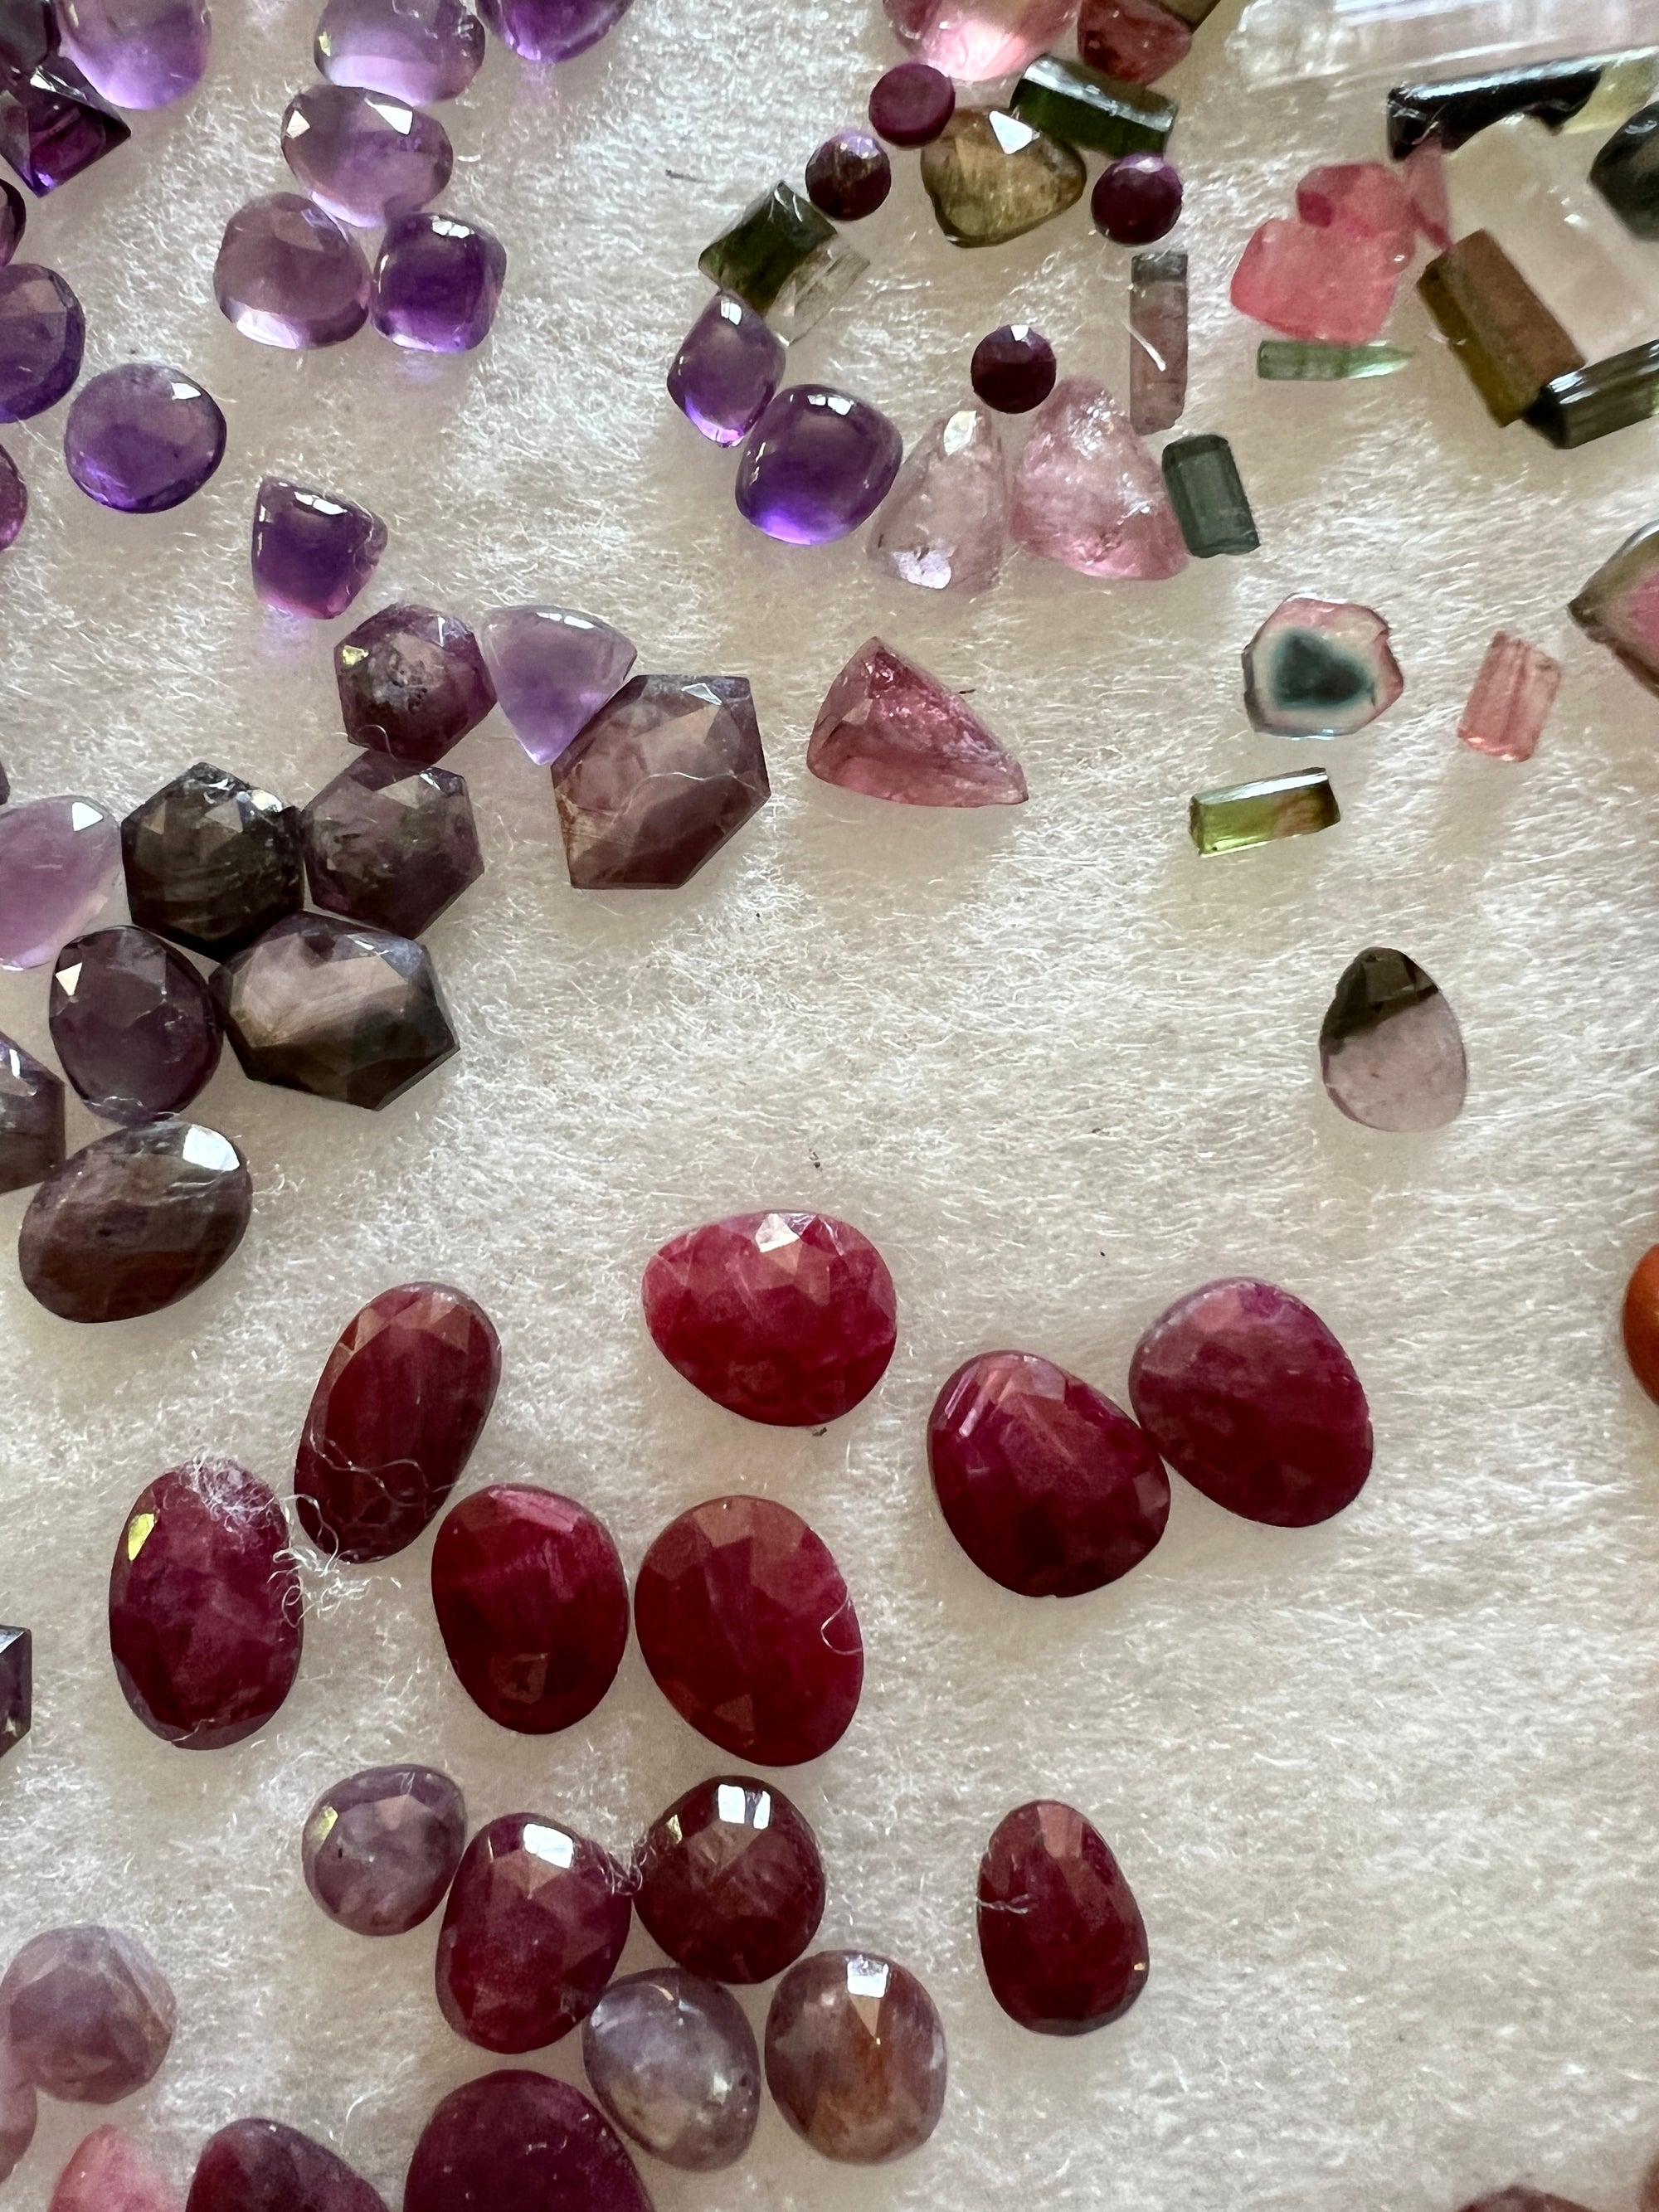 Ruby, garnet, watermelon tourmaline and amethyst cabochon stones lay in wait upon white fluffy material in a display case.